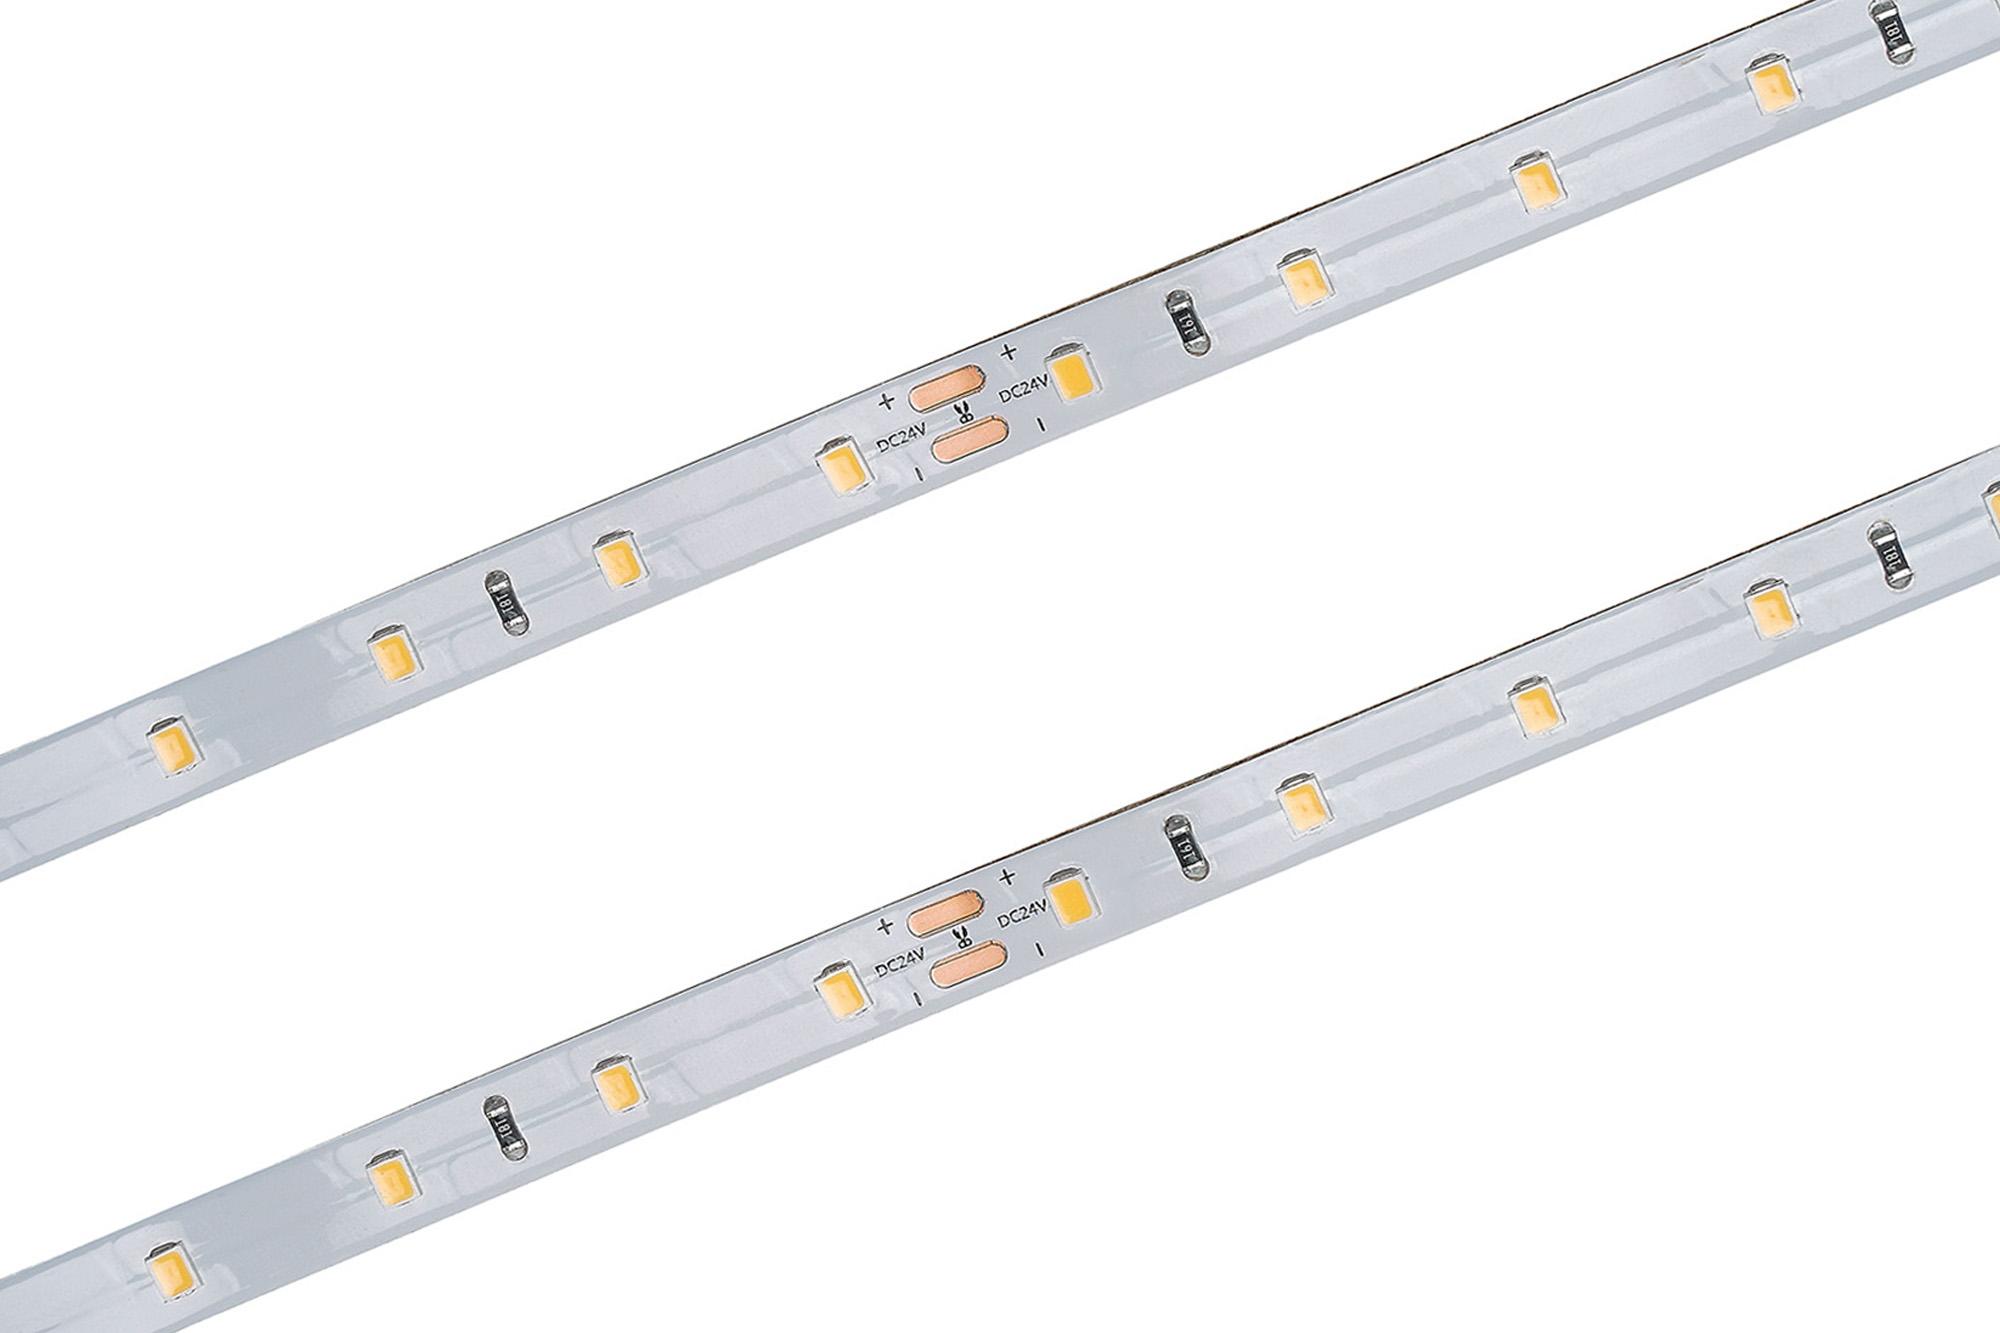 DX700116  Axios Select 5mx8mm 24V 24W LED Strip 380lm/m 4000K IP20